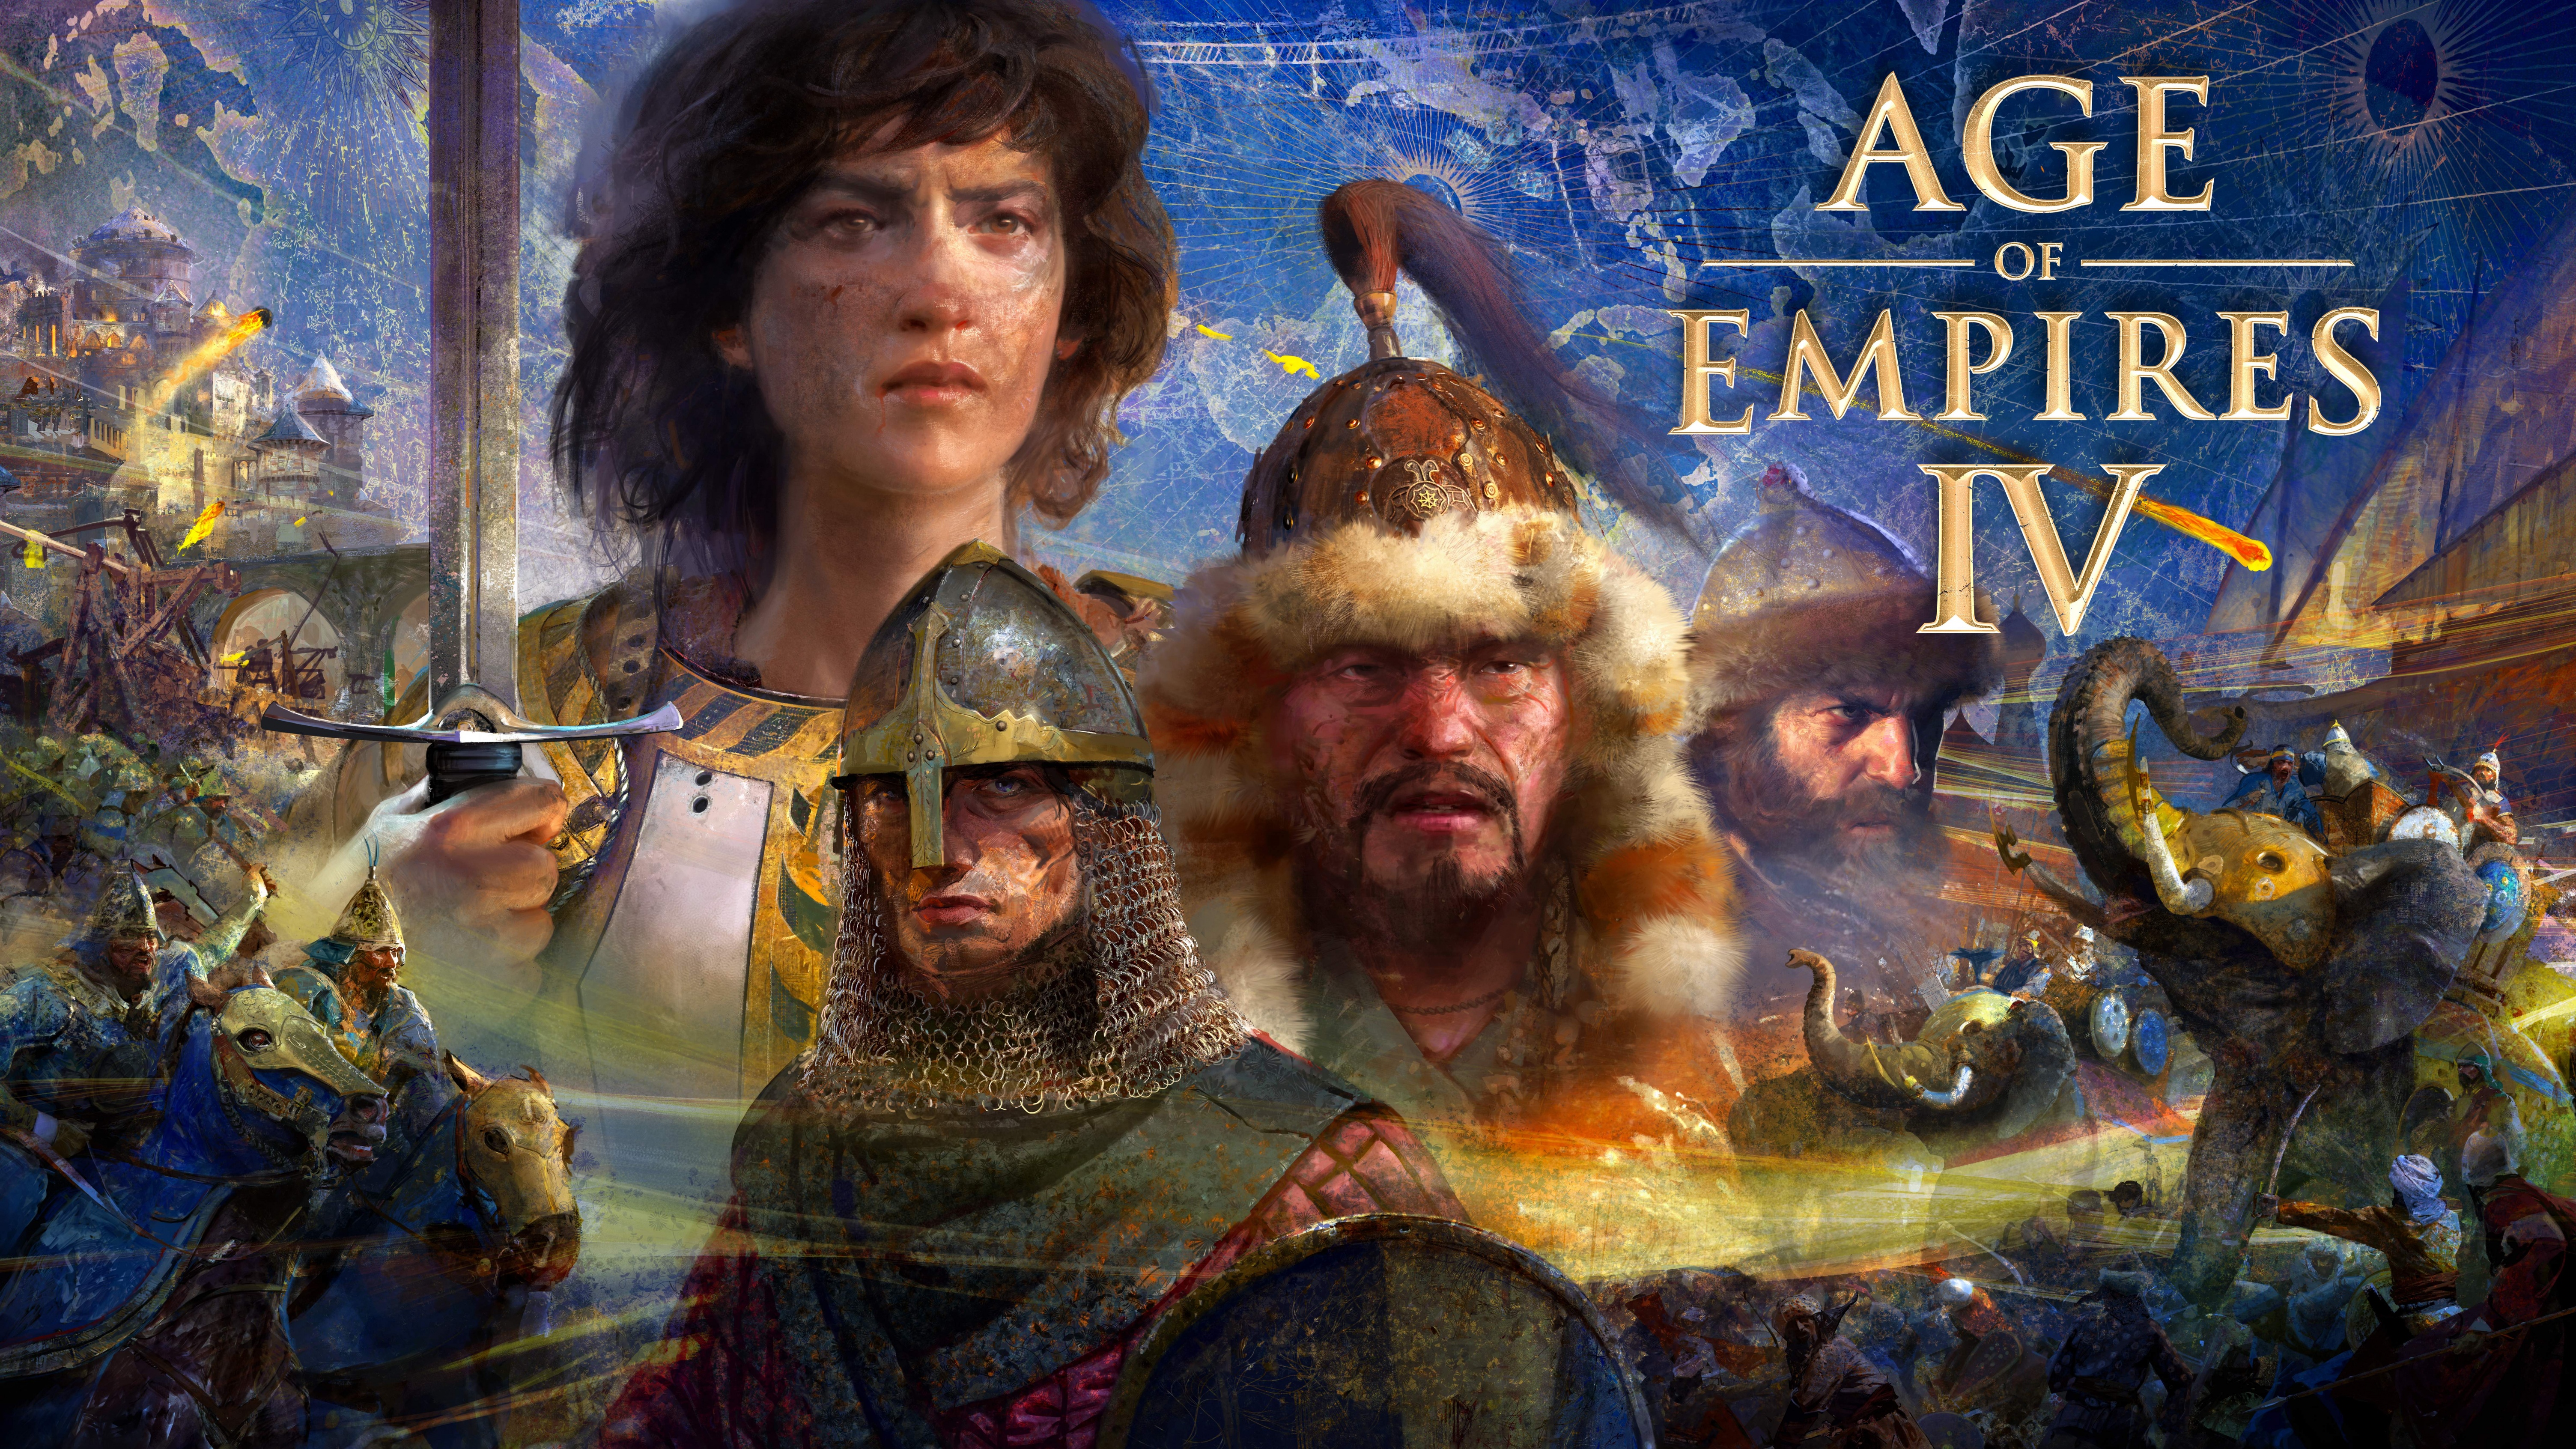 Wallpaper : 1920x1080 px, Age Of Empires 1920x1080 - wallbase - 1327715 -  HD Wallpapers - WallHere